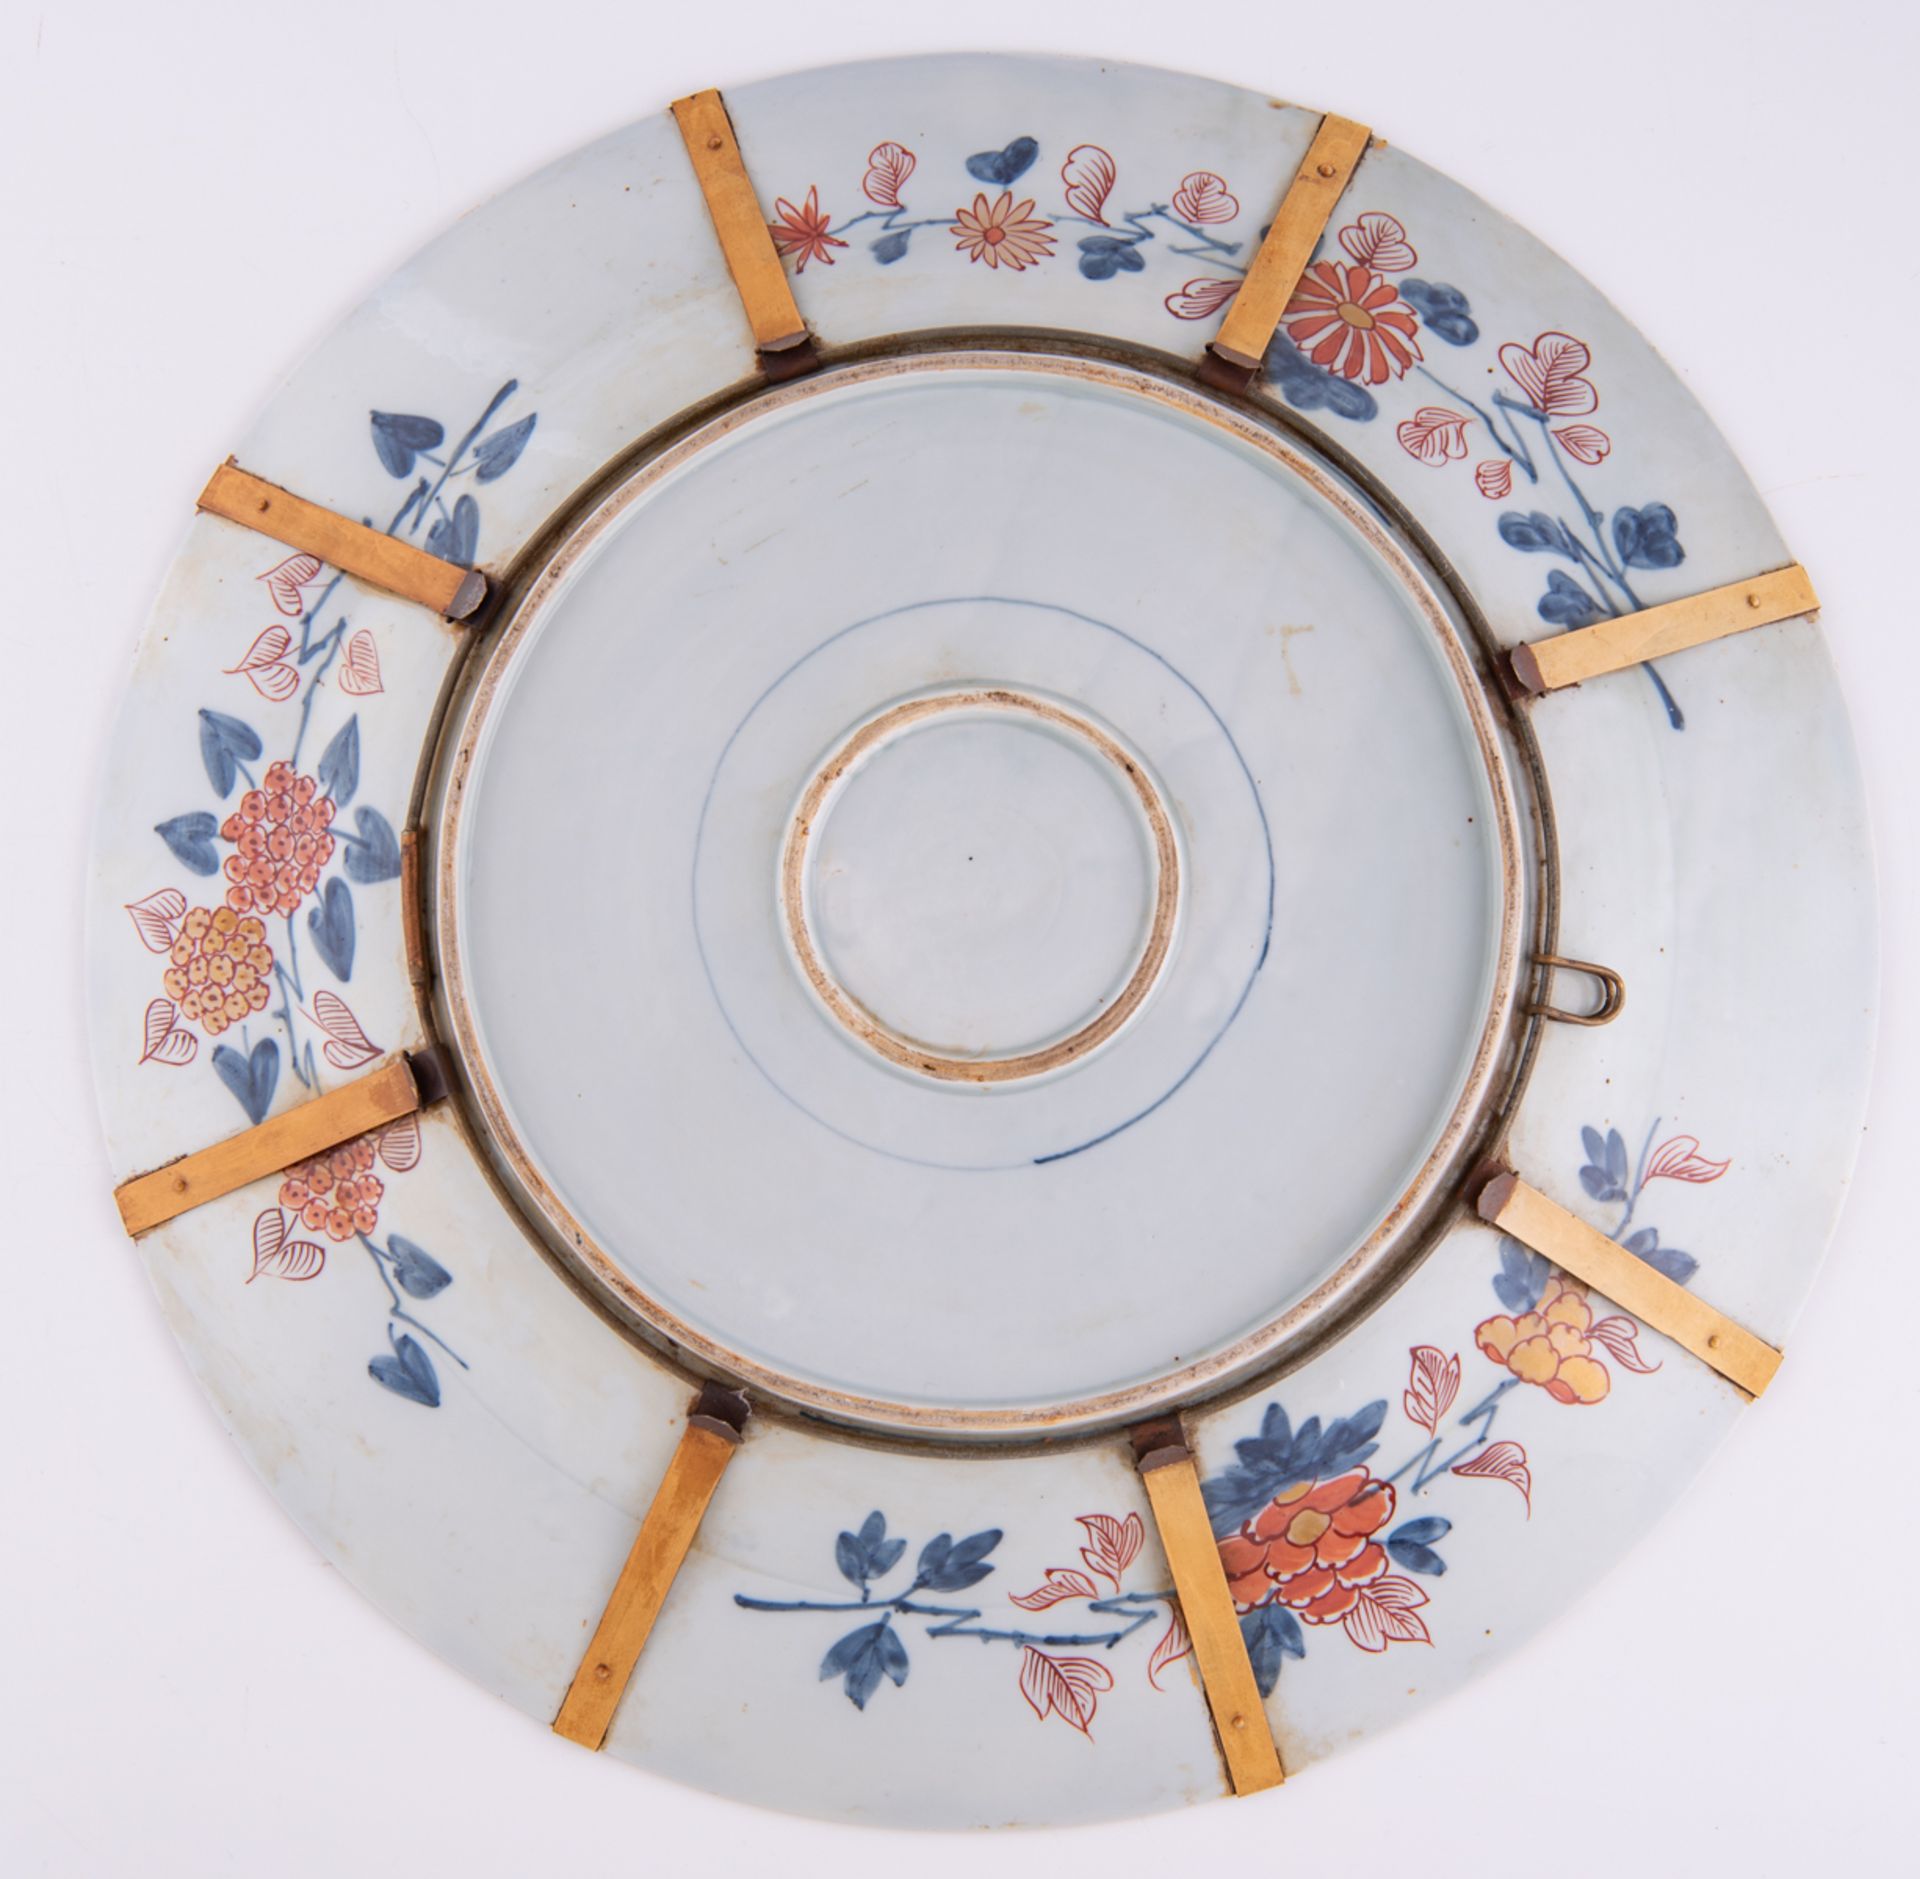 A large Edo period Japanese Imari plate, the central panel decorated with flowers, the roundels with - Image 2 of 2